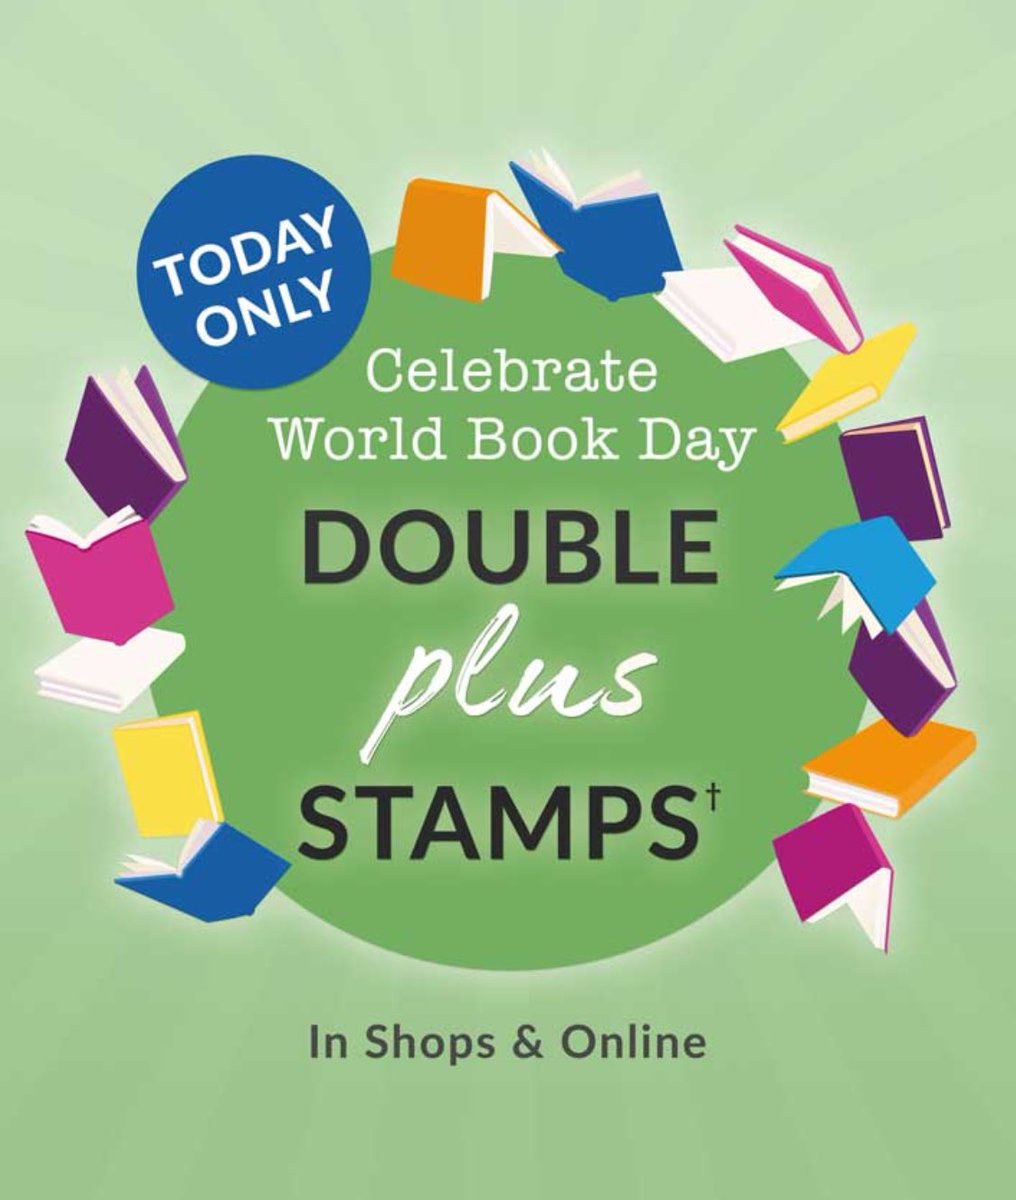 Happy World Book Day! To celebrate our Double Stamps offer is on today in store and online! Also this Saturday we’ll be celebrating with some Viking themed activities in celebration of one of the WBD titles Loki! We hope you read something you love today! 📚✨